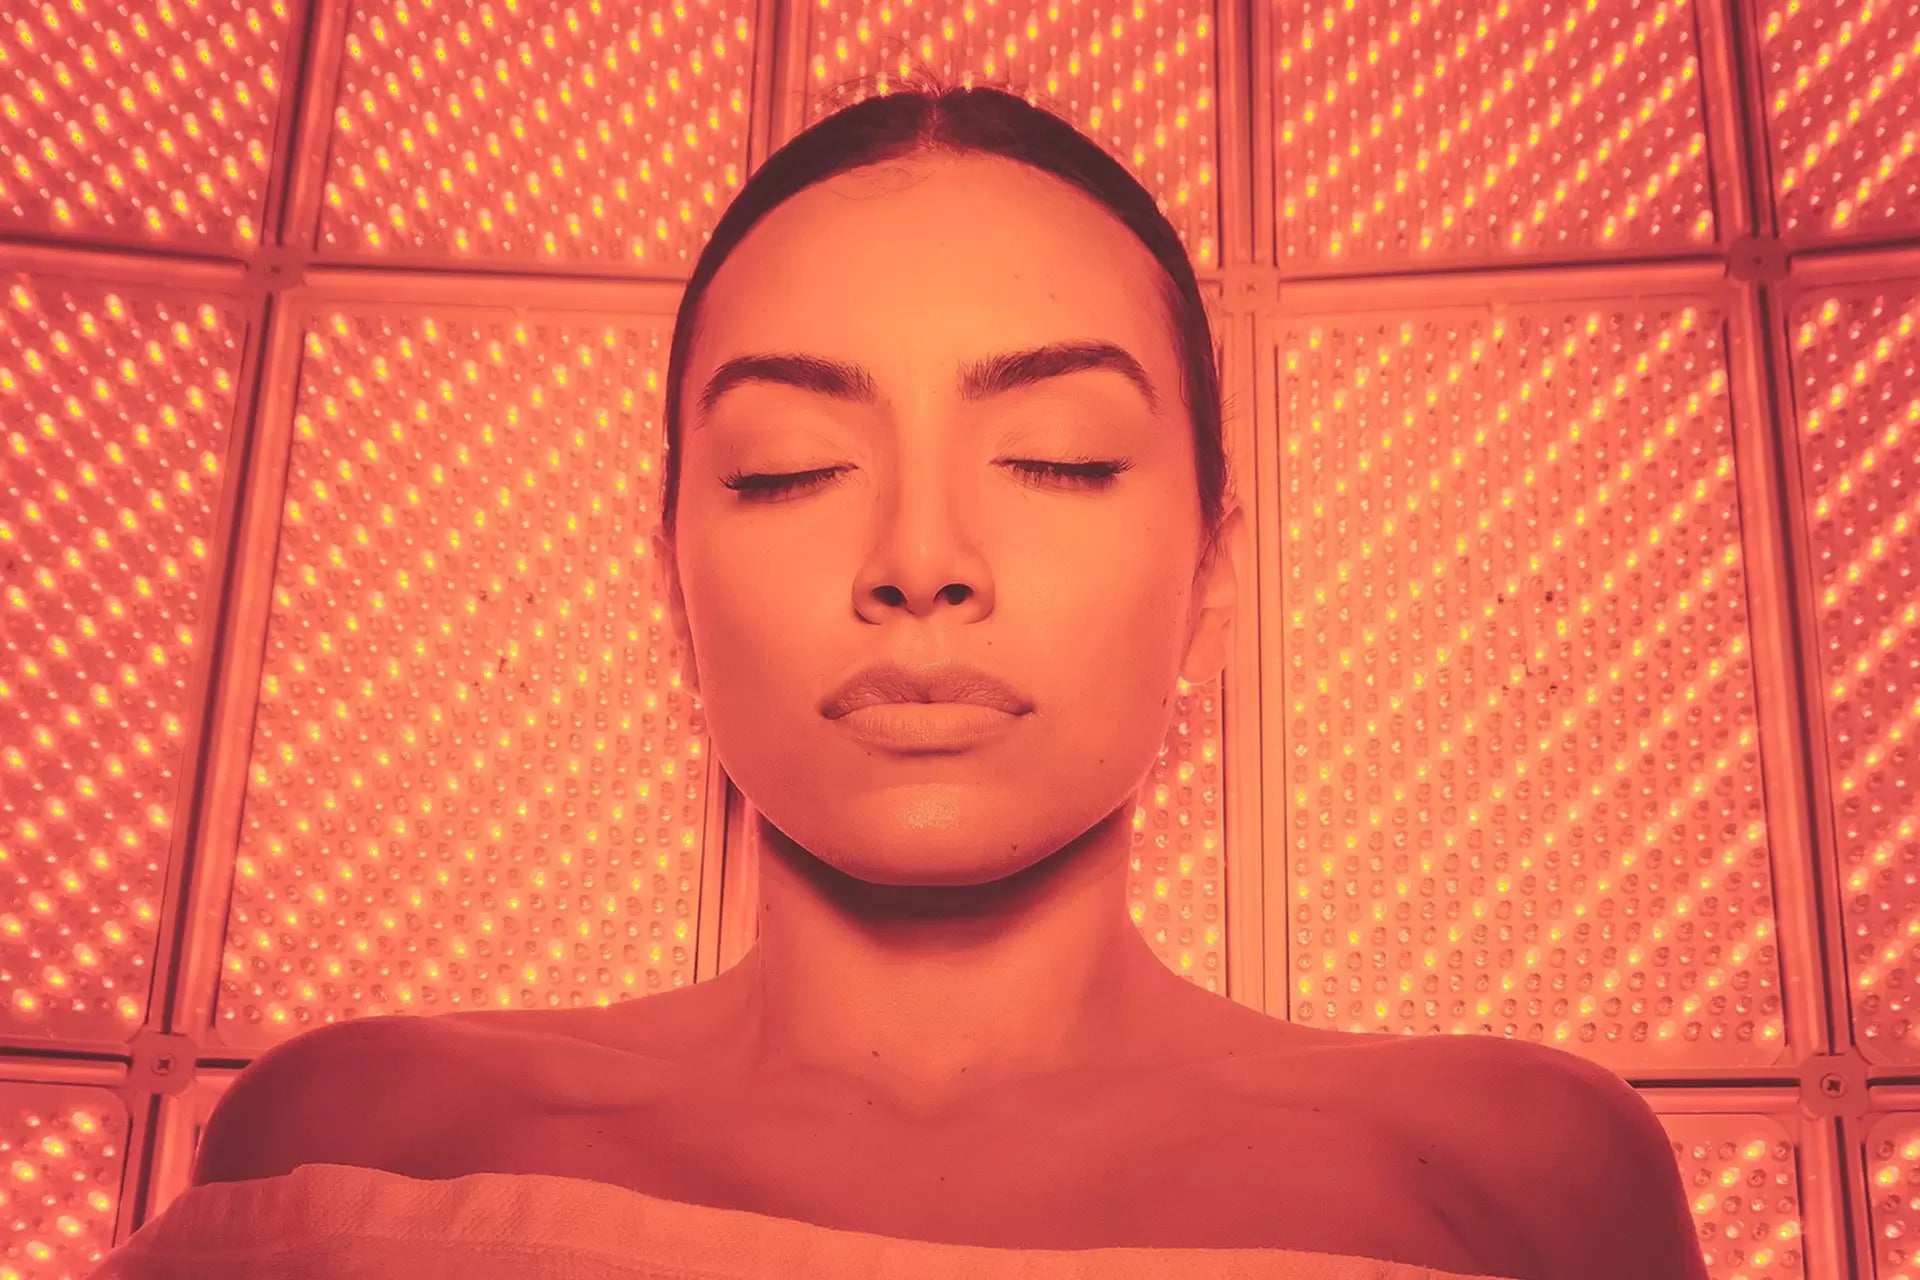 Red Light Therapy at Home: A Non-Invasive Approach to Addressing Skin Laxity